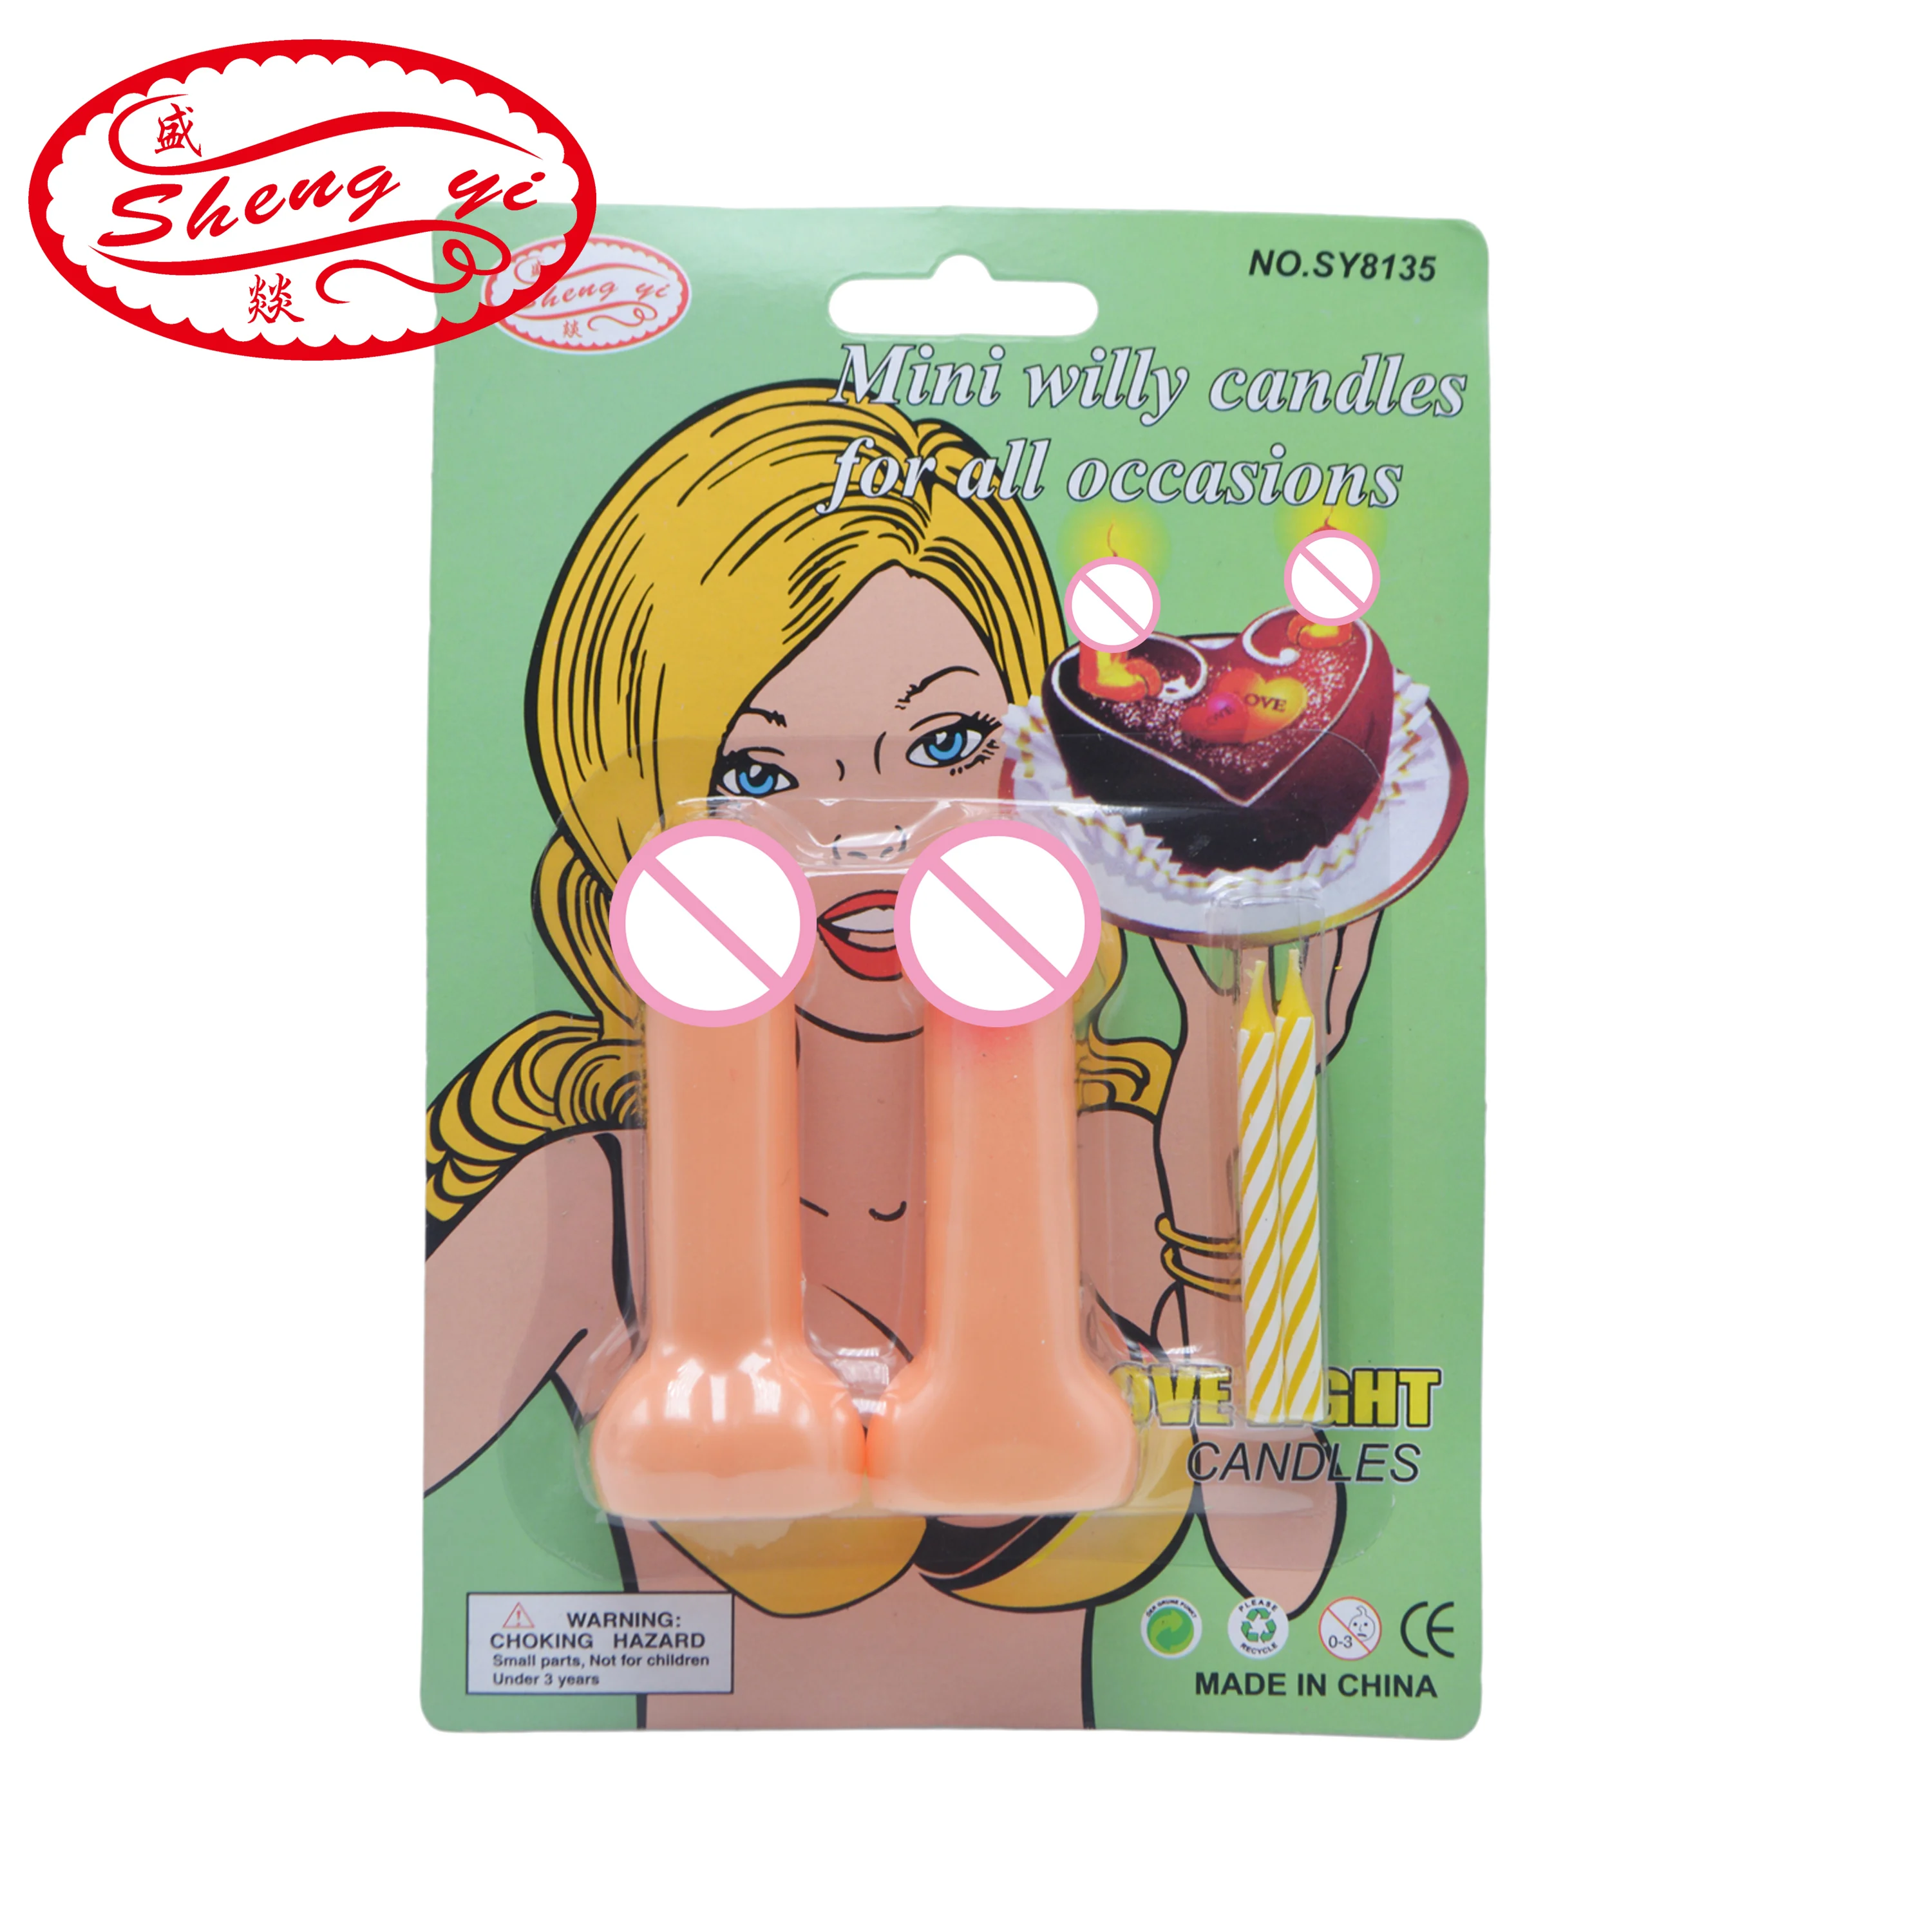 

SHENGYI 2Pcs/set Dick Penis Candle Hen Party Accessories Gift Bachelor Party for Couples Flirting Sex Shop Plastic Willy Candles